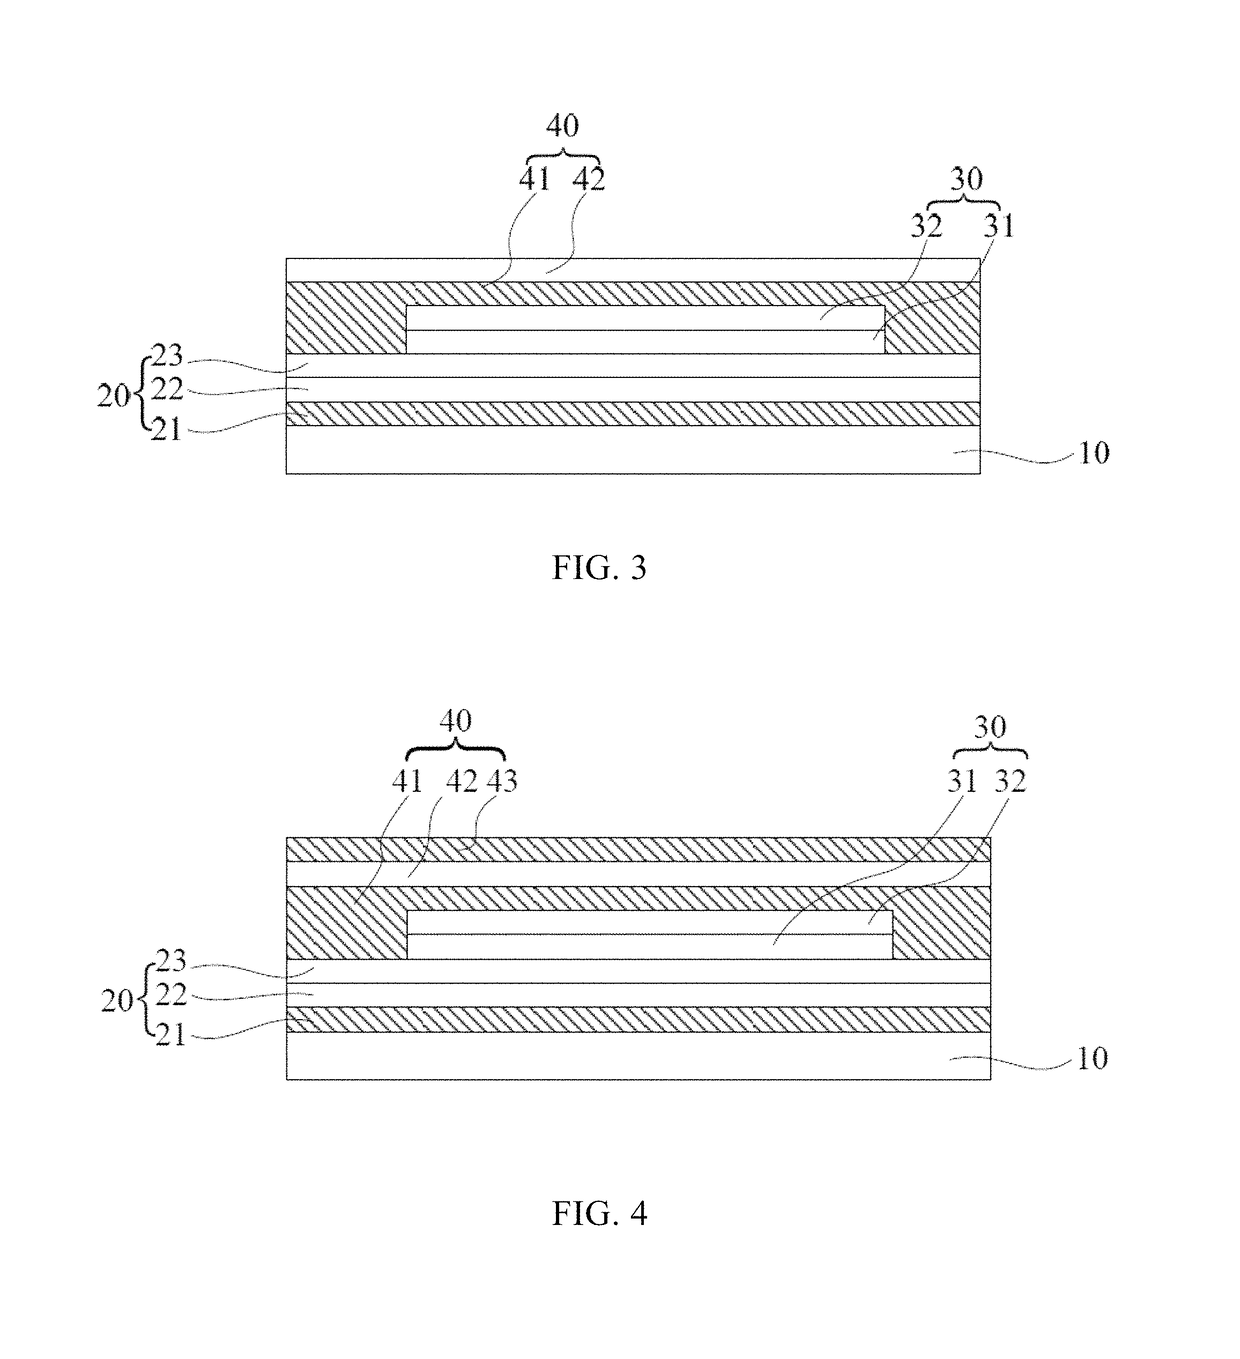 Flexible display device having a self-healing capability and fabrication method thereof